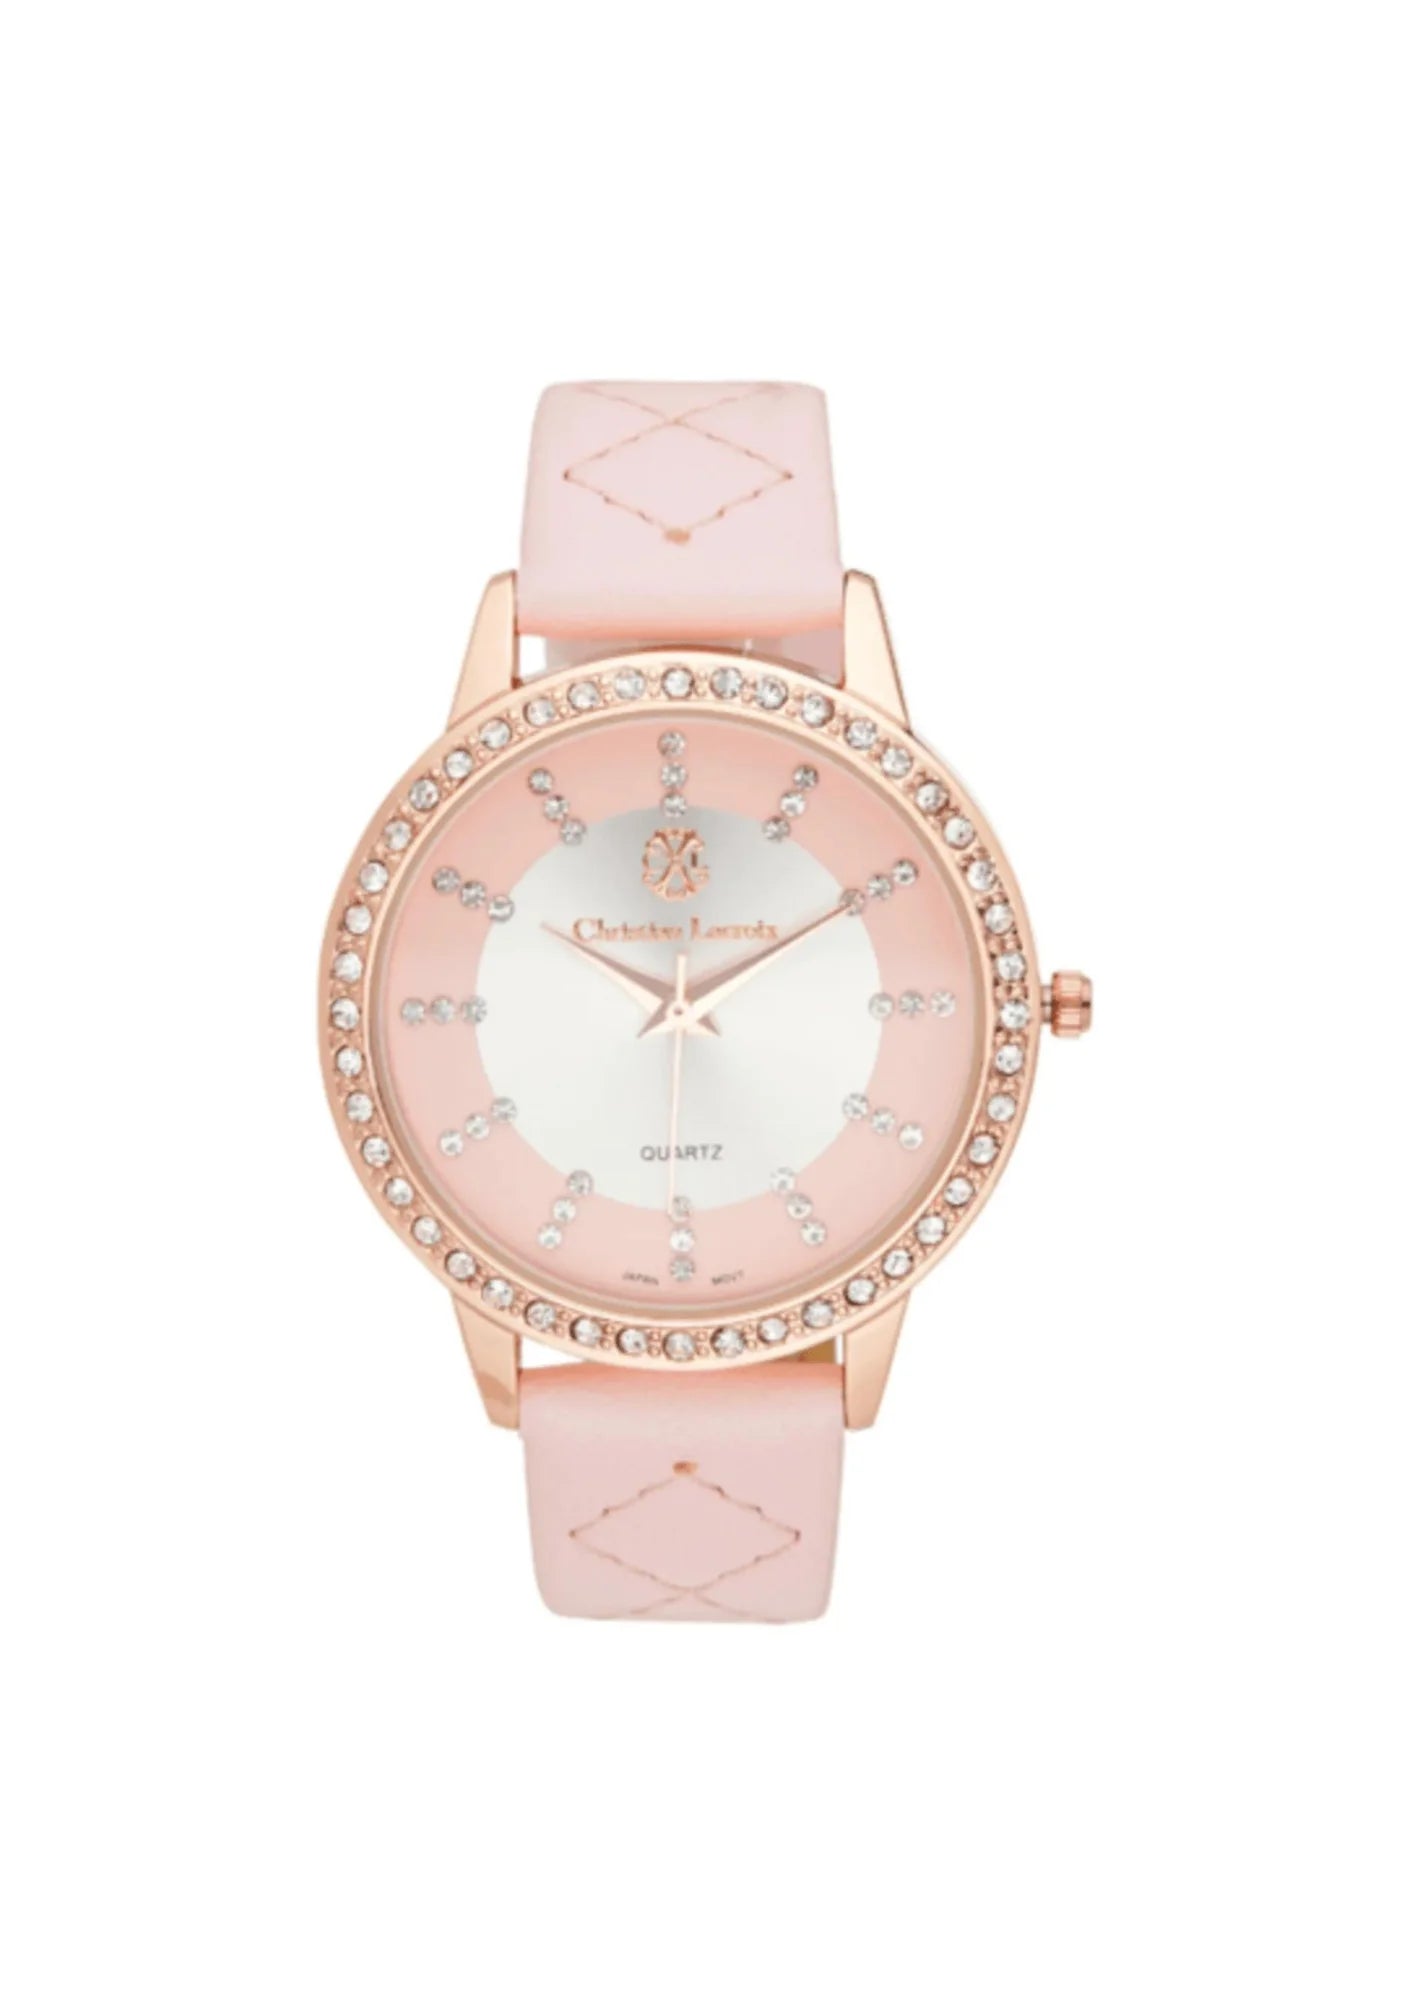 PINK AND GOLD LEATHER QUARTZ WATCH